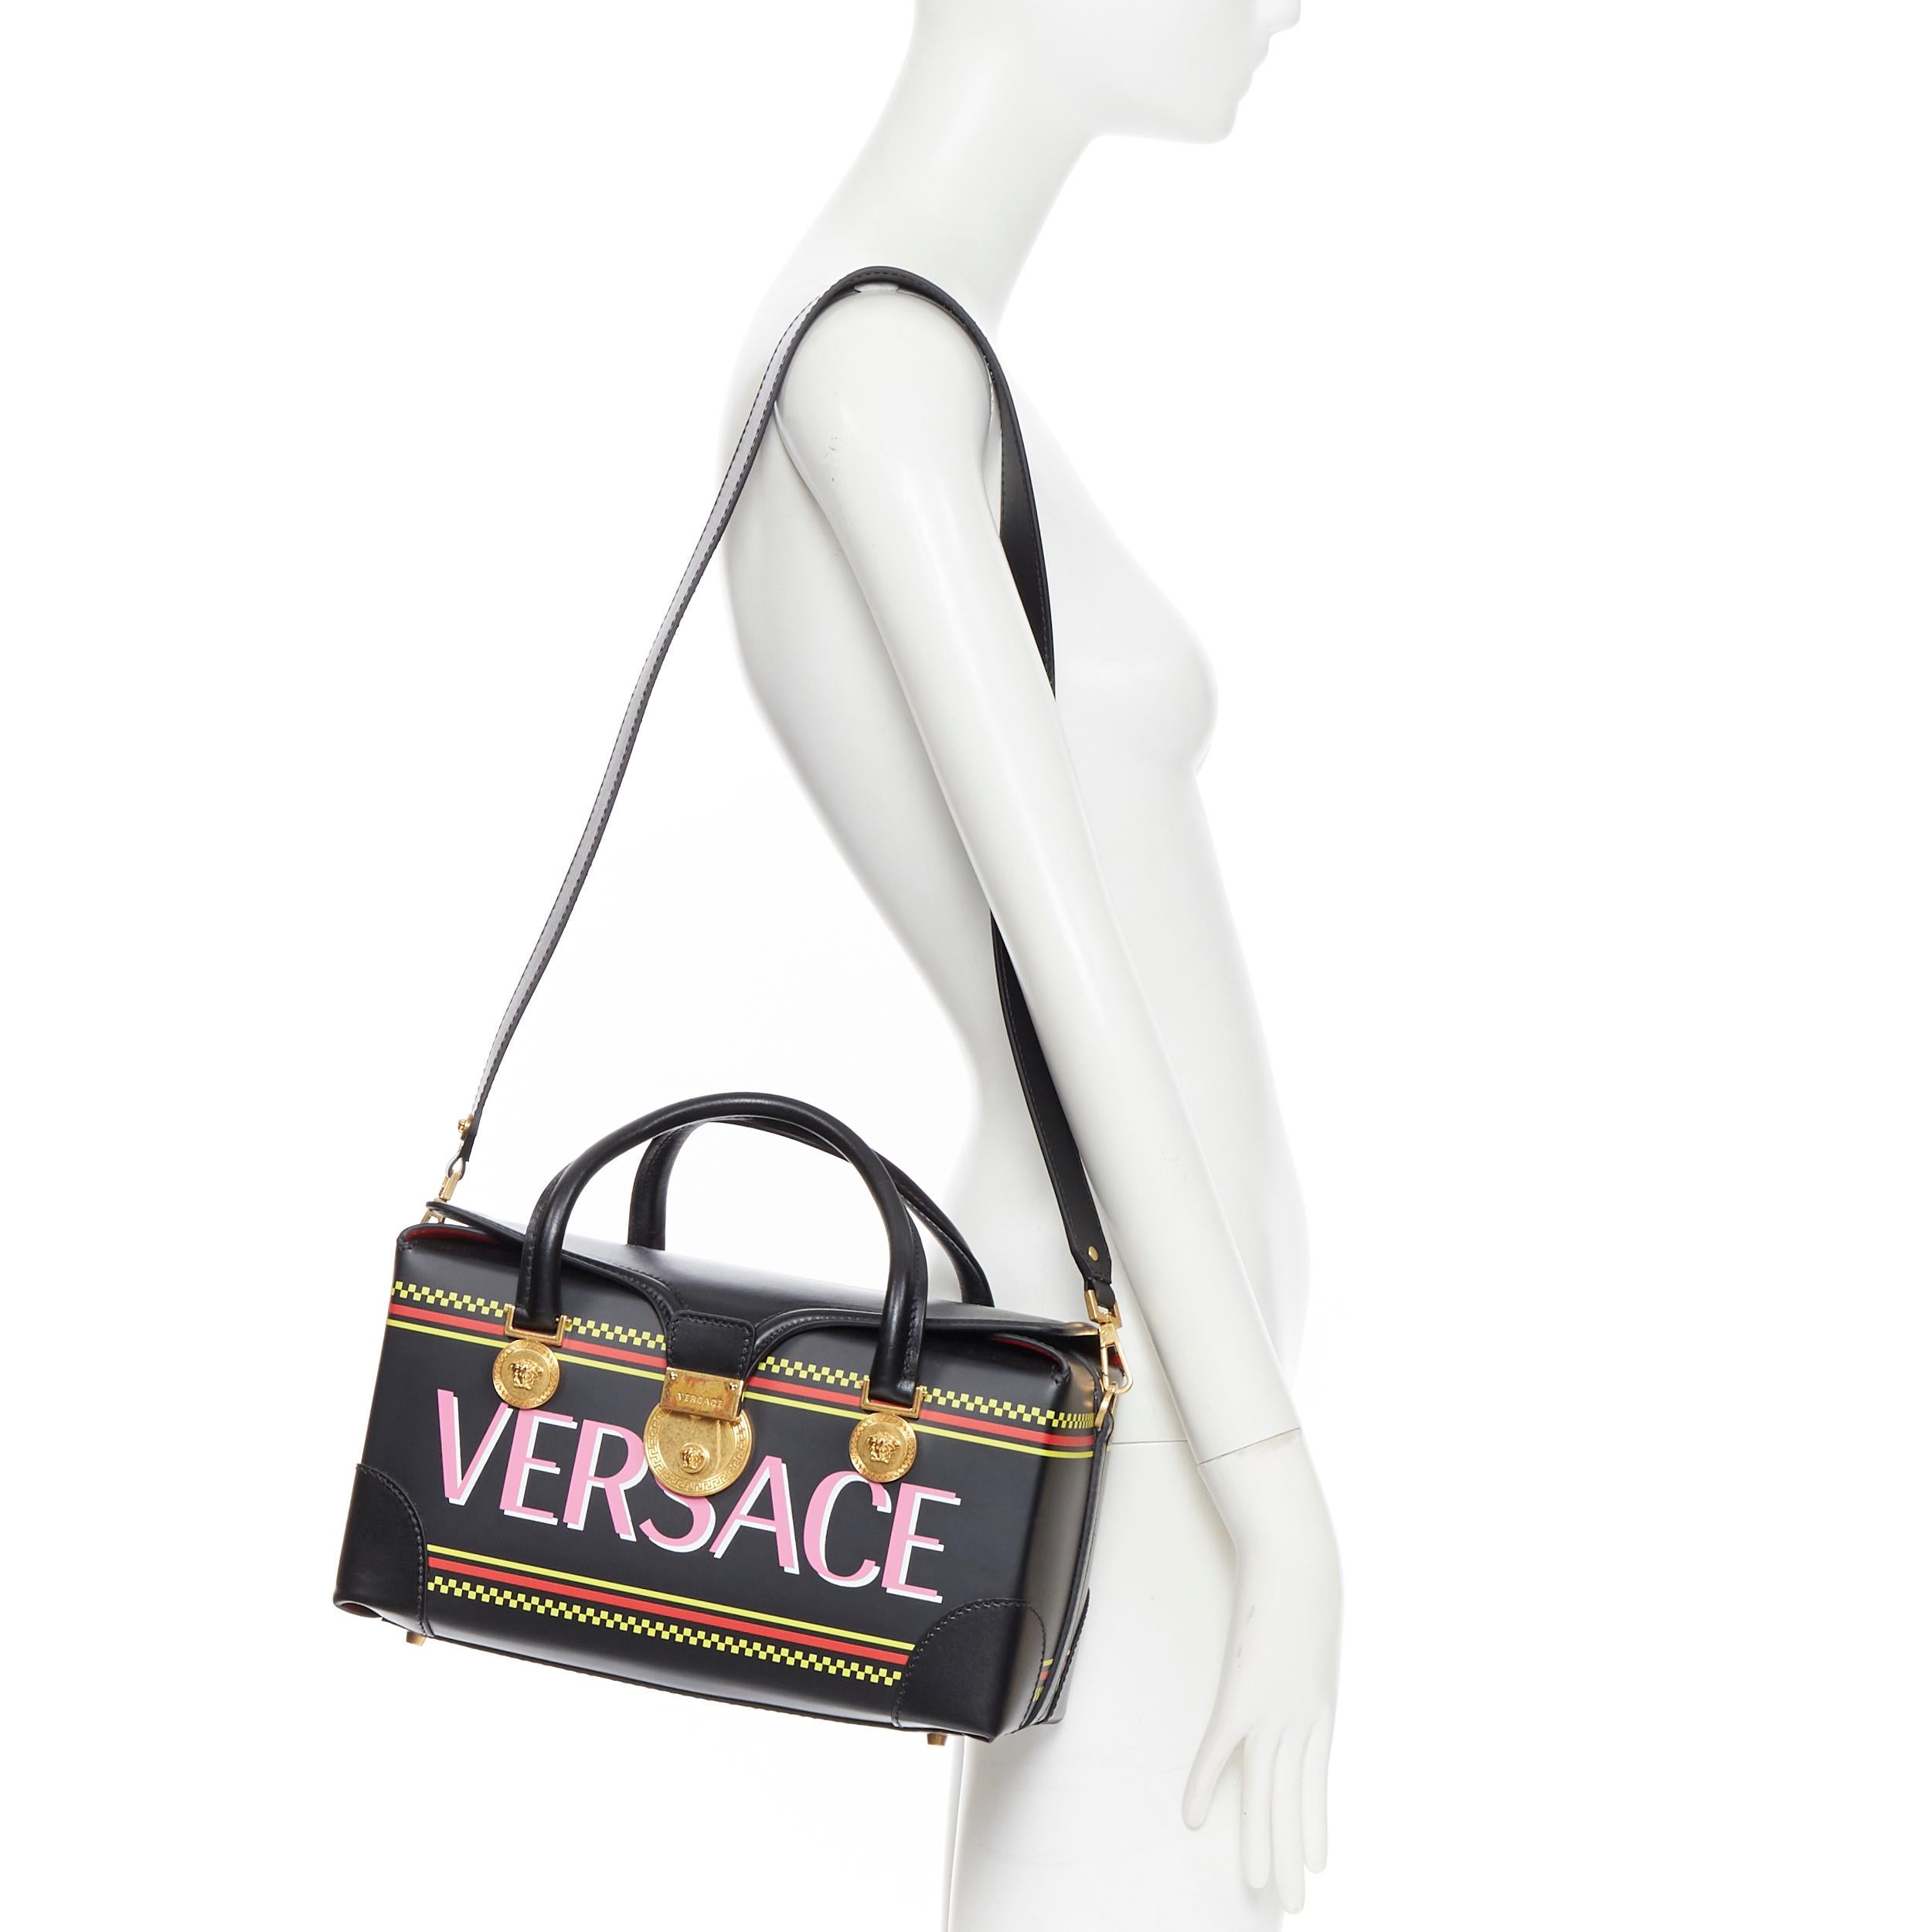 new VERSACE Vitello 90's Vintage Logo Medusa coin top handle structured box bag
Brand: Versace
Designer: Donatella Versace
Collection: 2019
Model Name / Style: 90's logo bag
Material: Leather
Color: Black
Pattern: Solid
Closure: Clasp
Lining